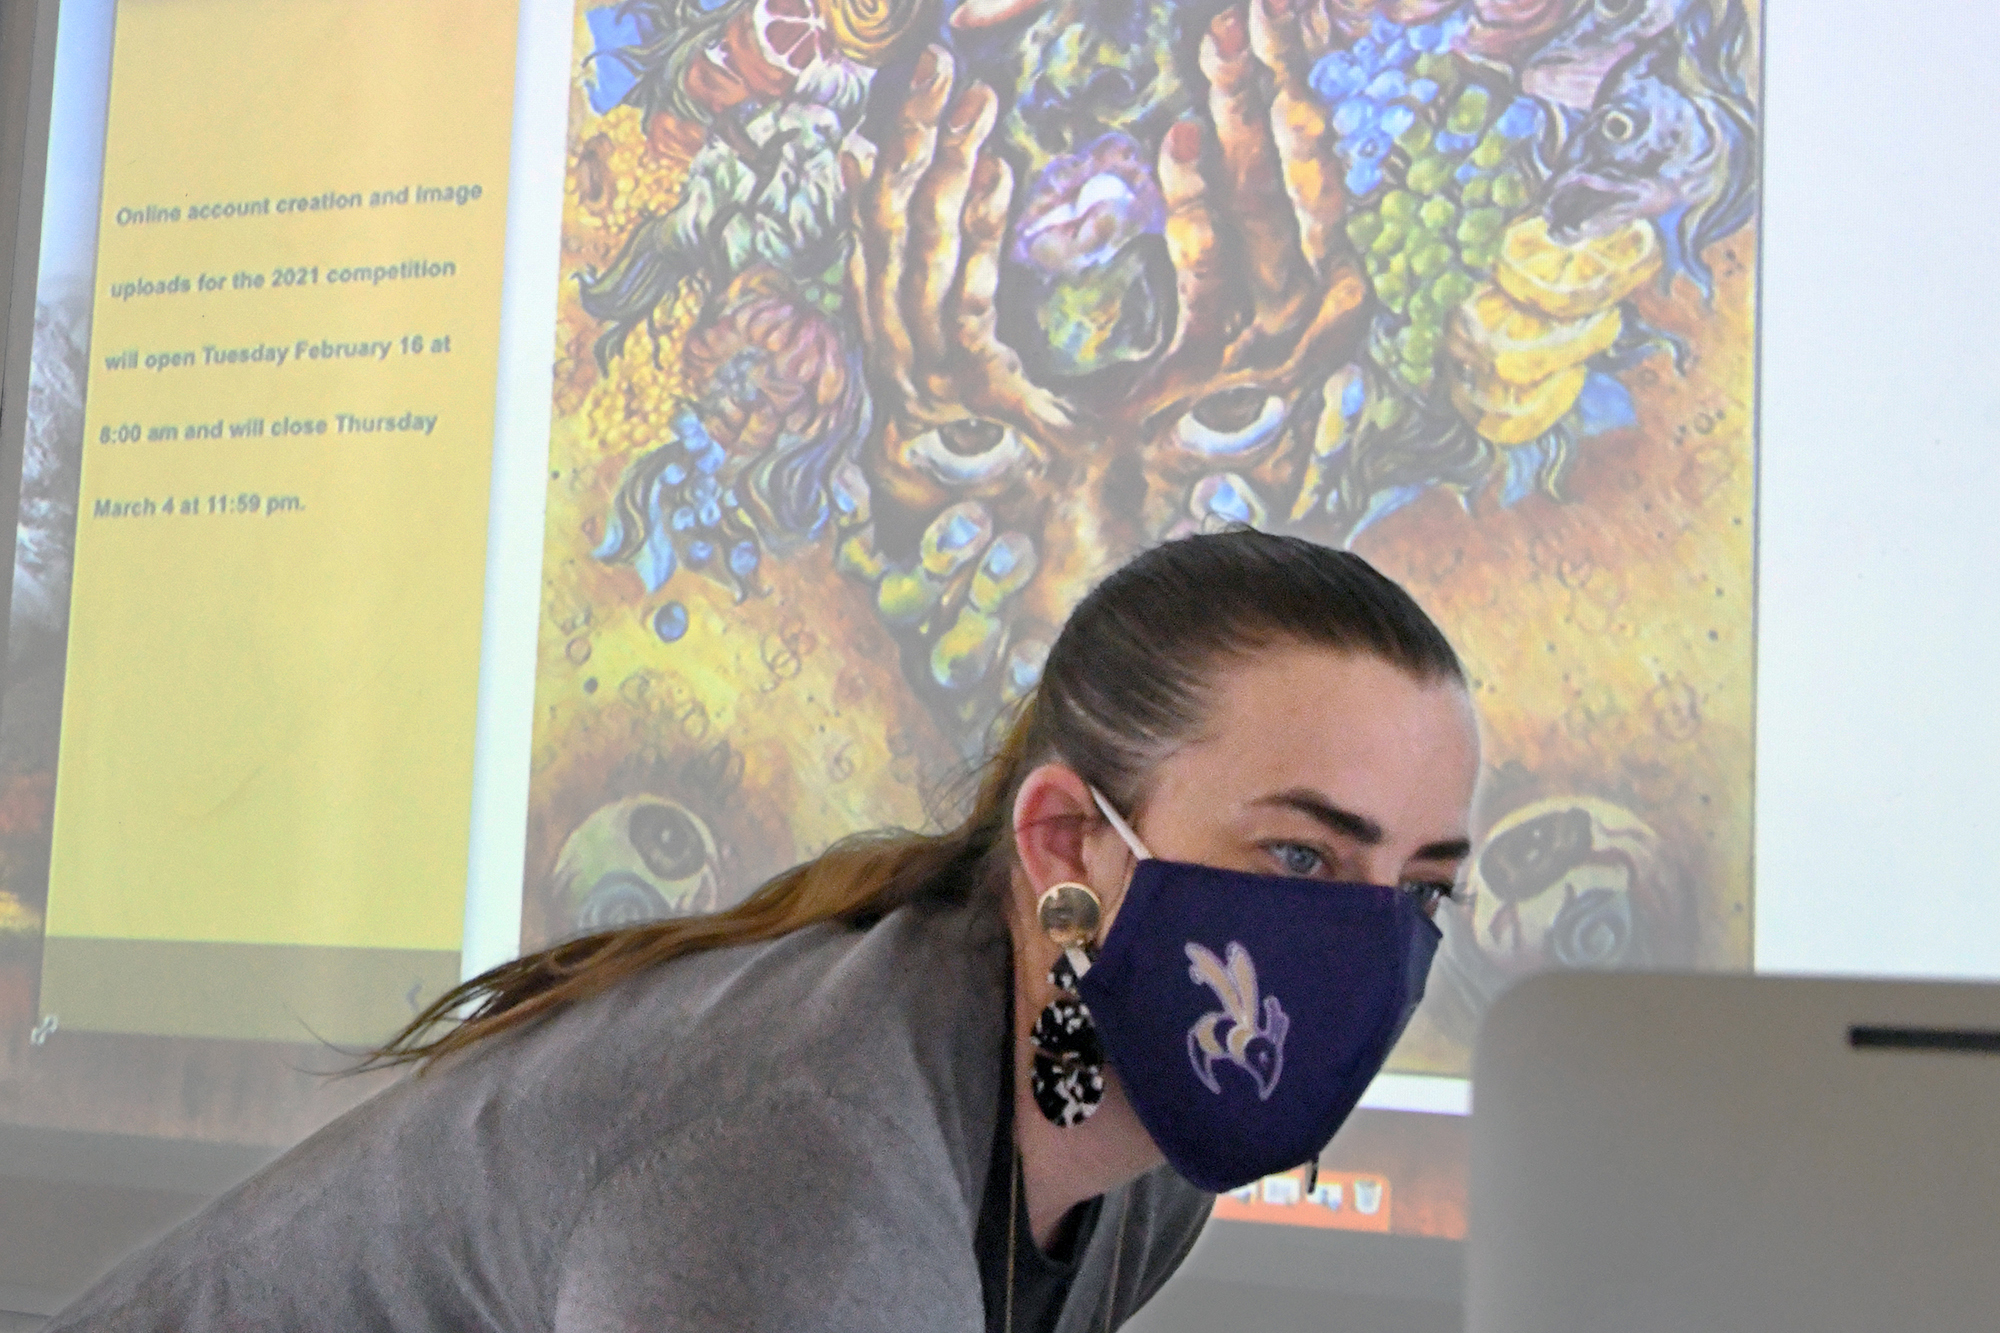 Woman with a long pony tail wearing a mask in front of a projected screen with artwork on it